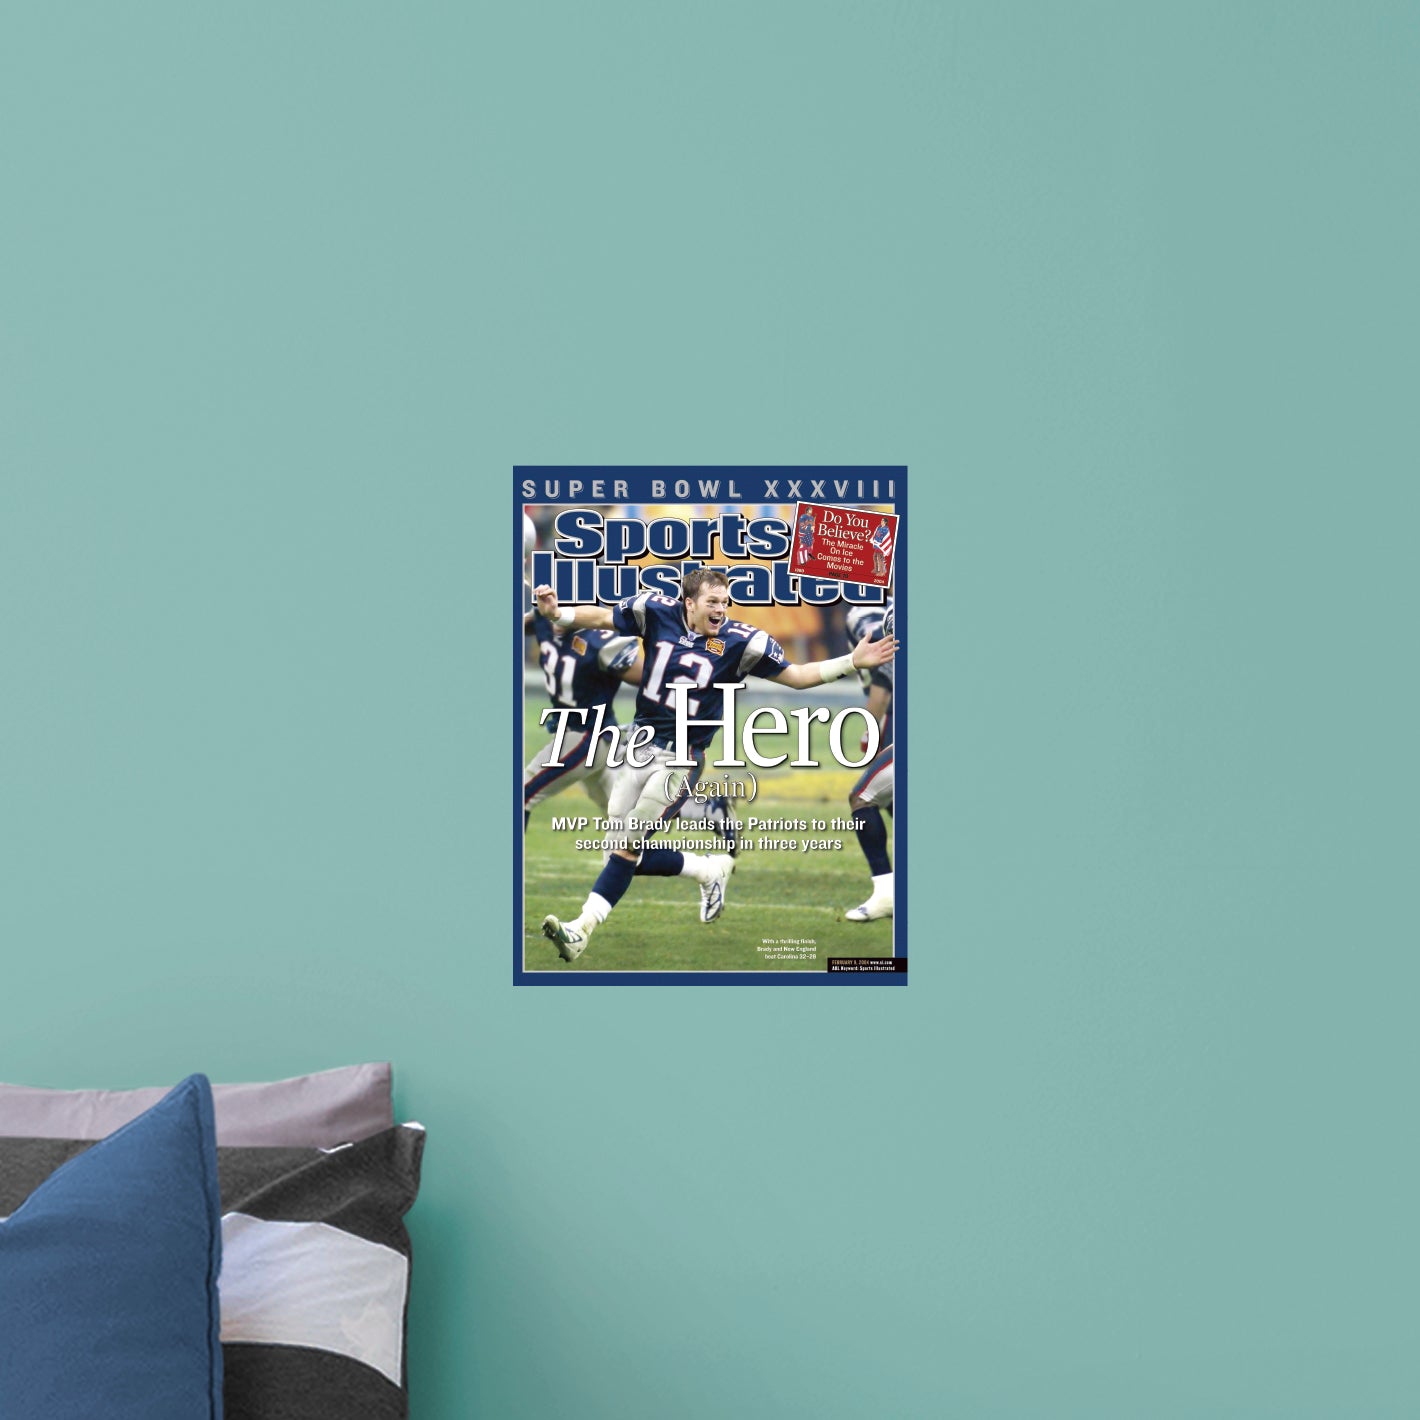 New England Patriots: Tom Brady February 2004 Super Bowl XXXVIII Championship Edition Sports Illustrated Cover - Officially Licensed NFL Removable Adhesive Decal